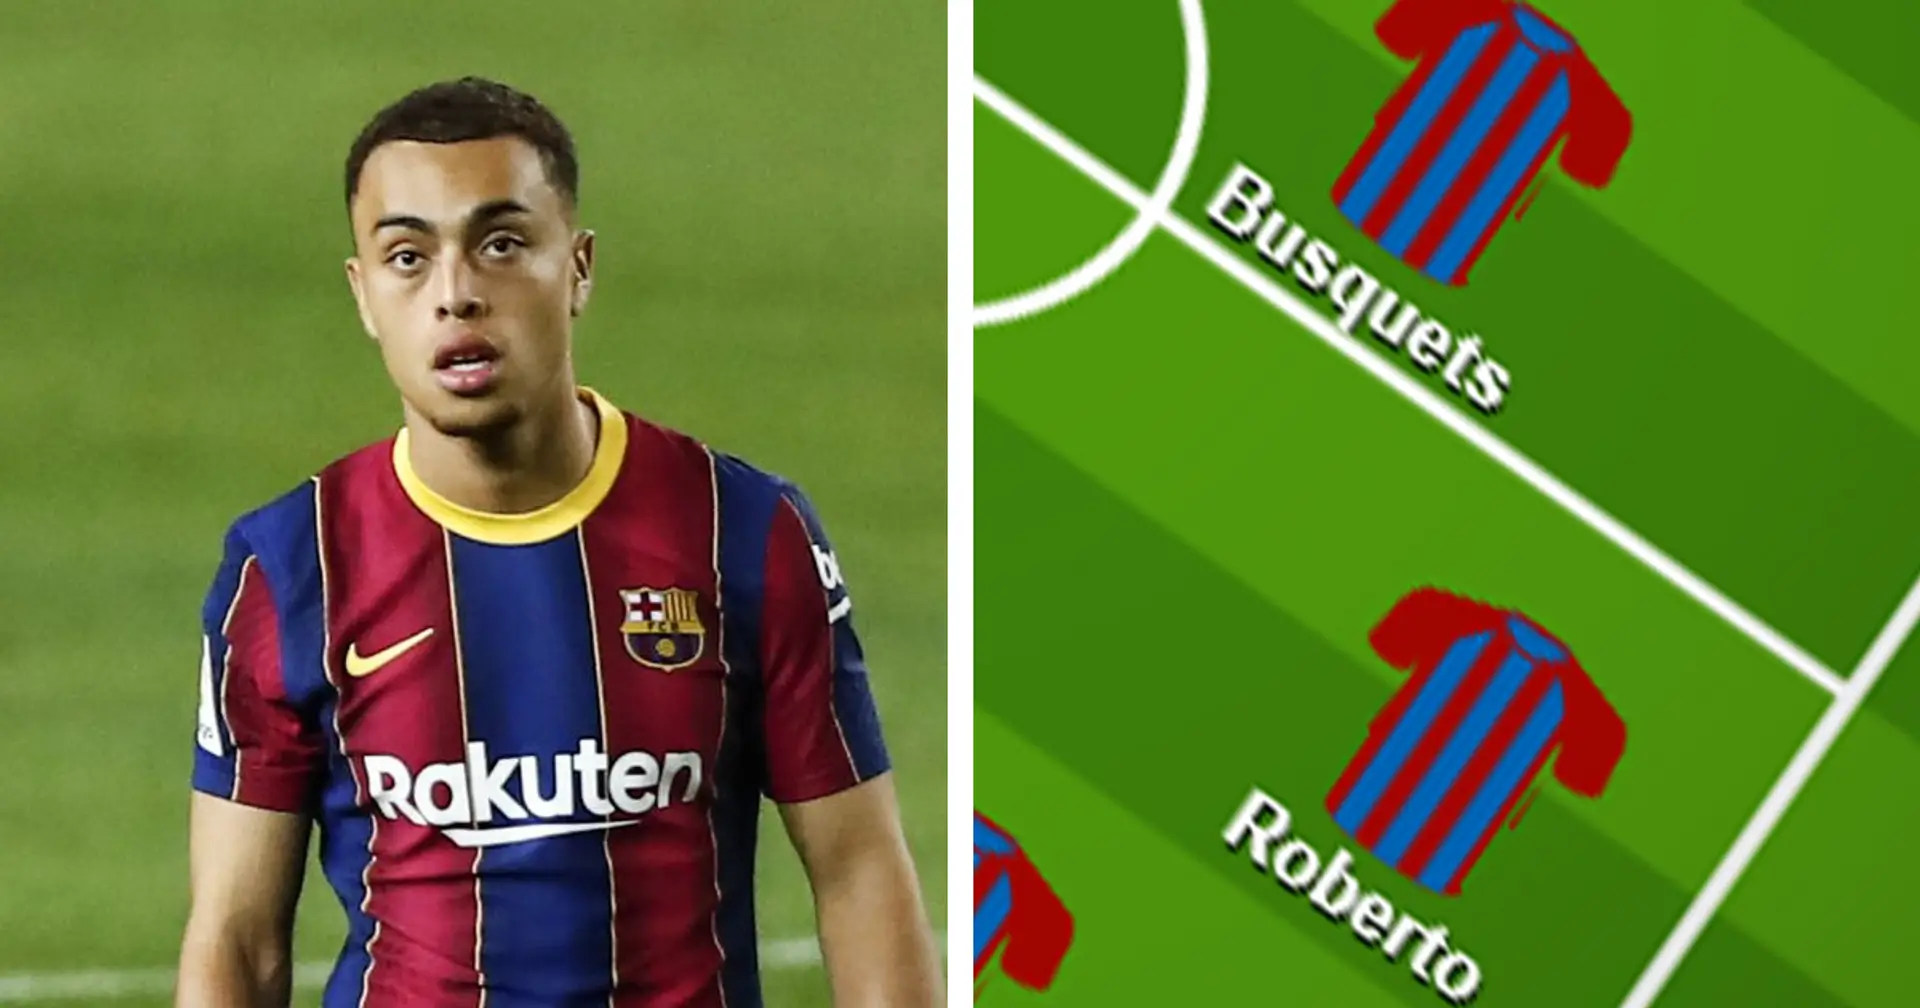 How Barcelona might line up against Athletic based on El Clasico loss